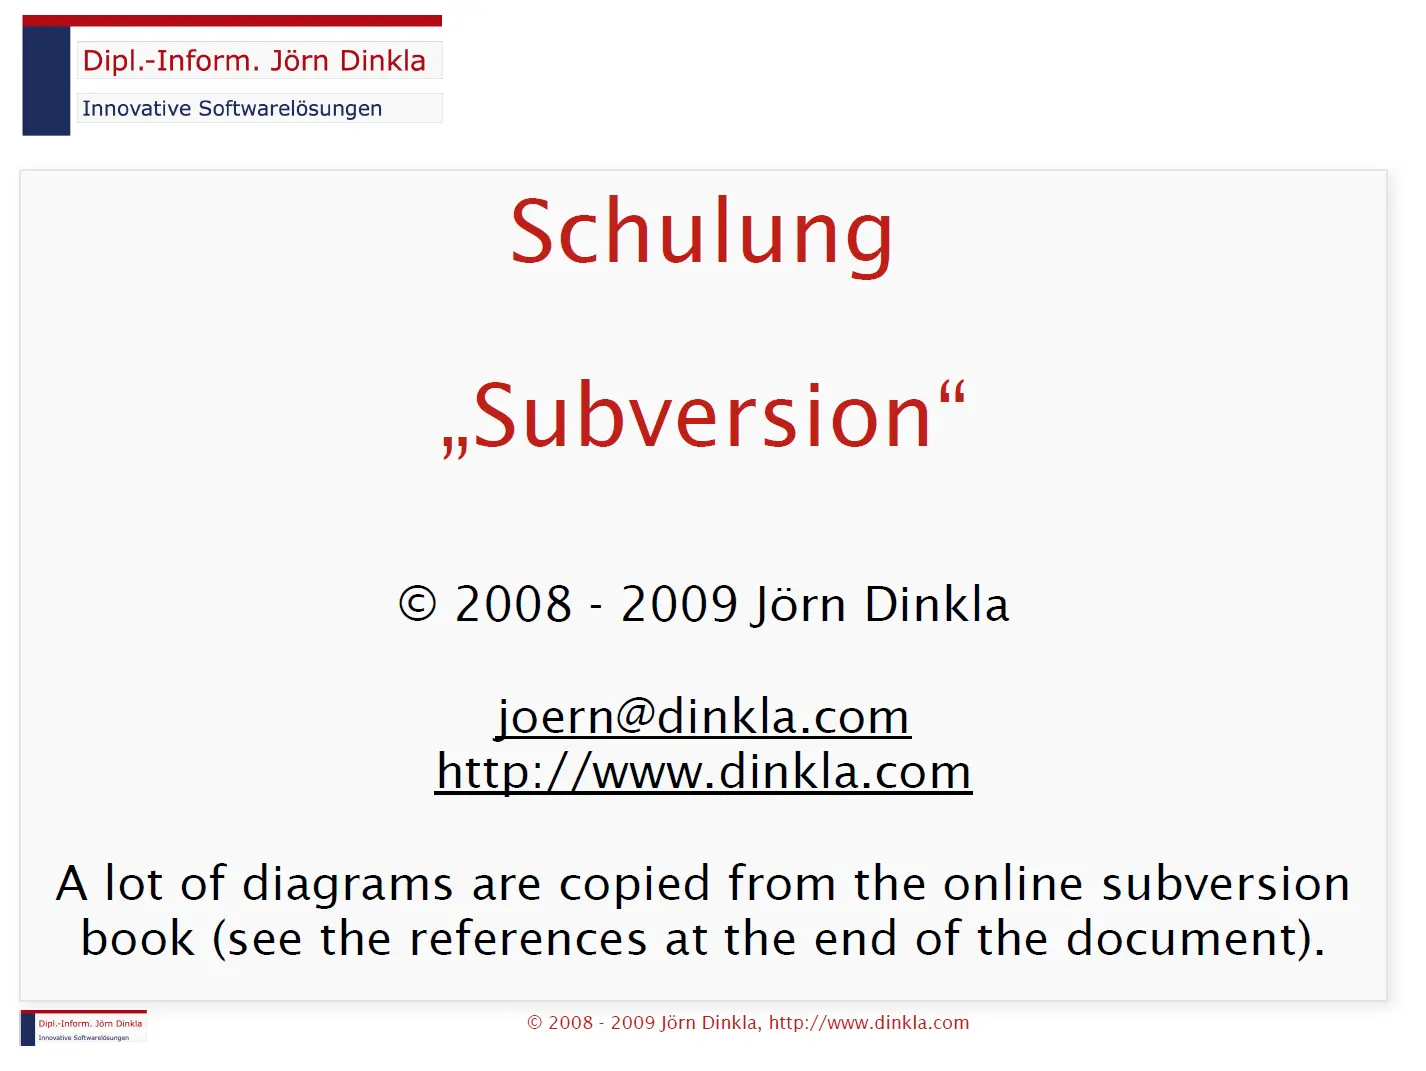 Schulung 'Subversion'